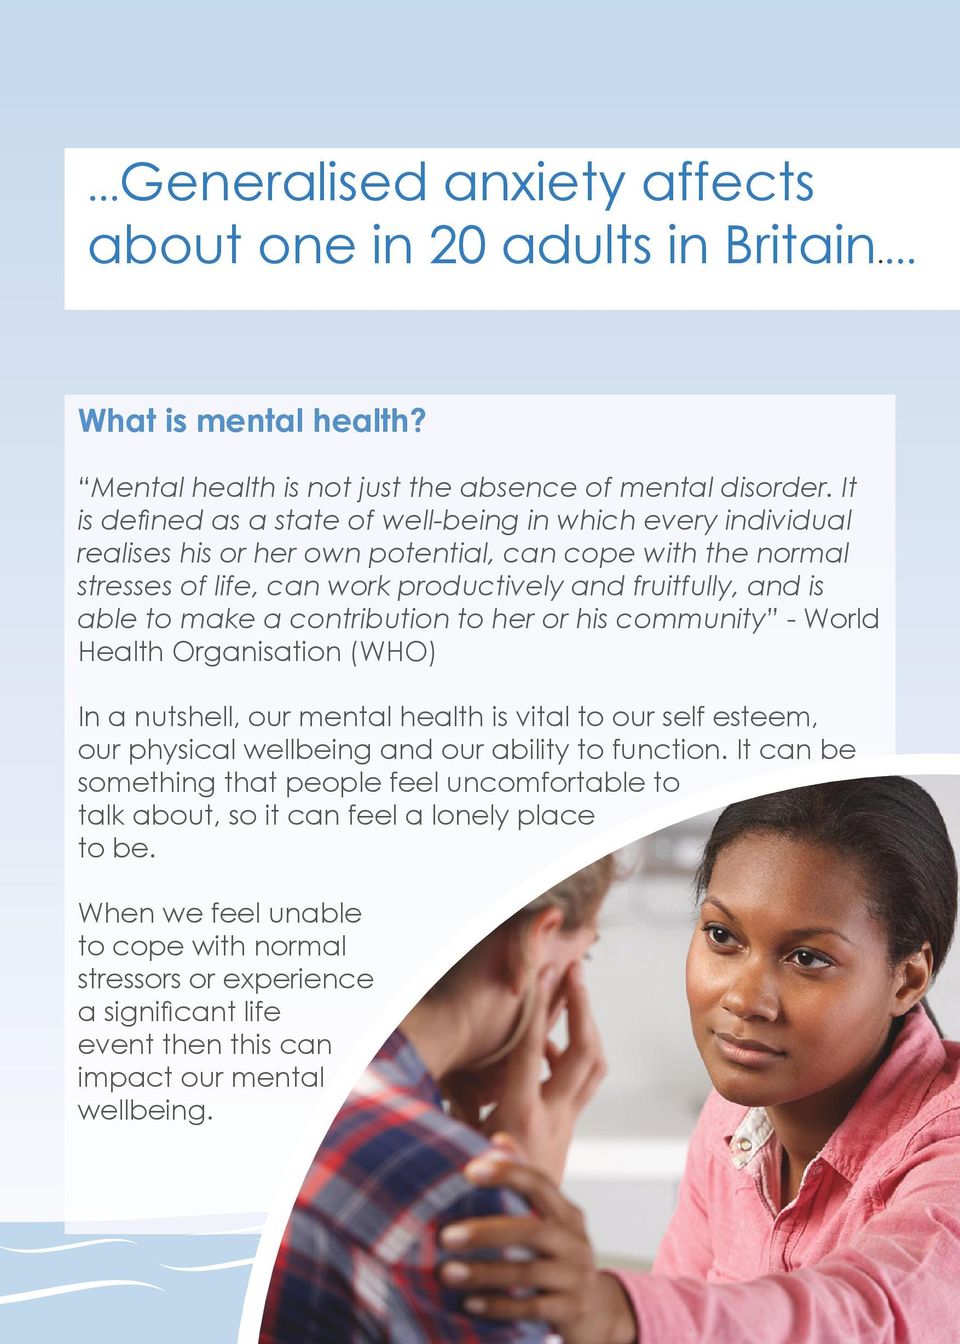 to make a contribution to her or his community - World Health Organisation (WHO) In a nutshell, our mental health is vital to our self esteem, our physical wellbeing and our ability to